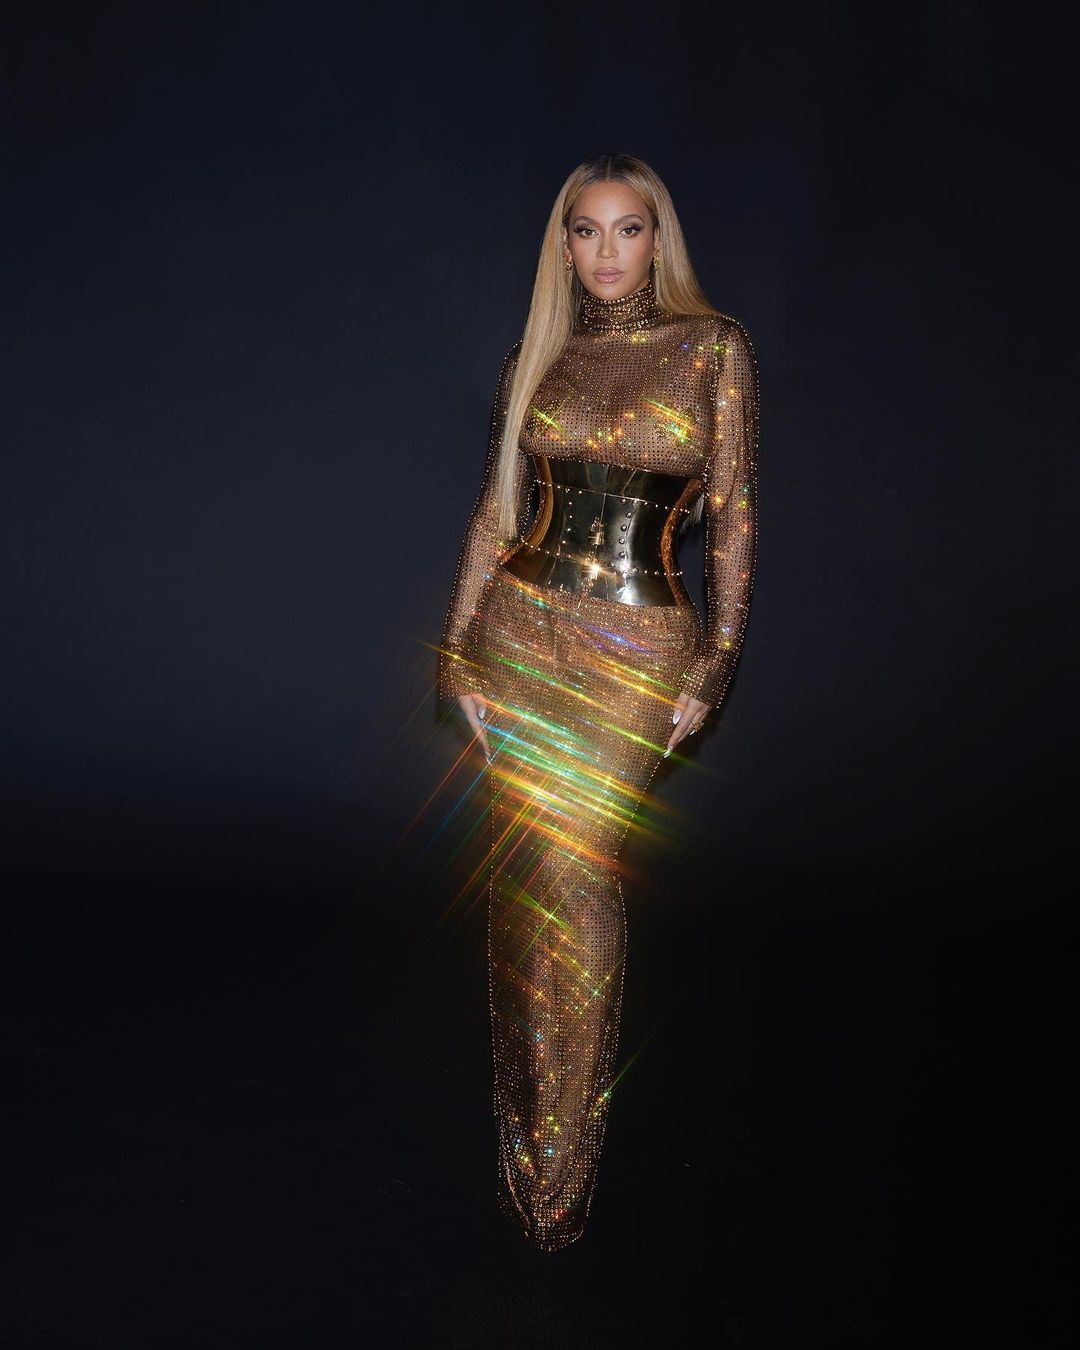 Beyonce Shines in a See Through Dress! - Photo 1